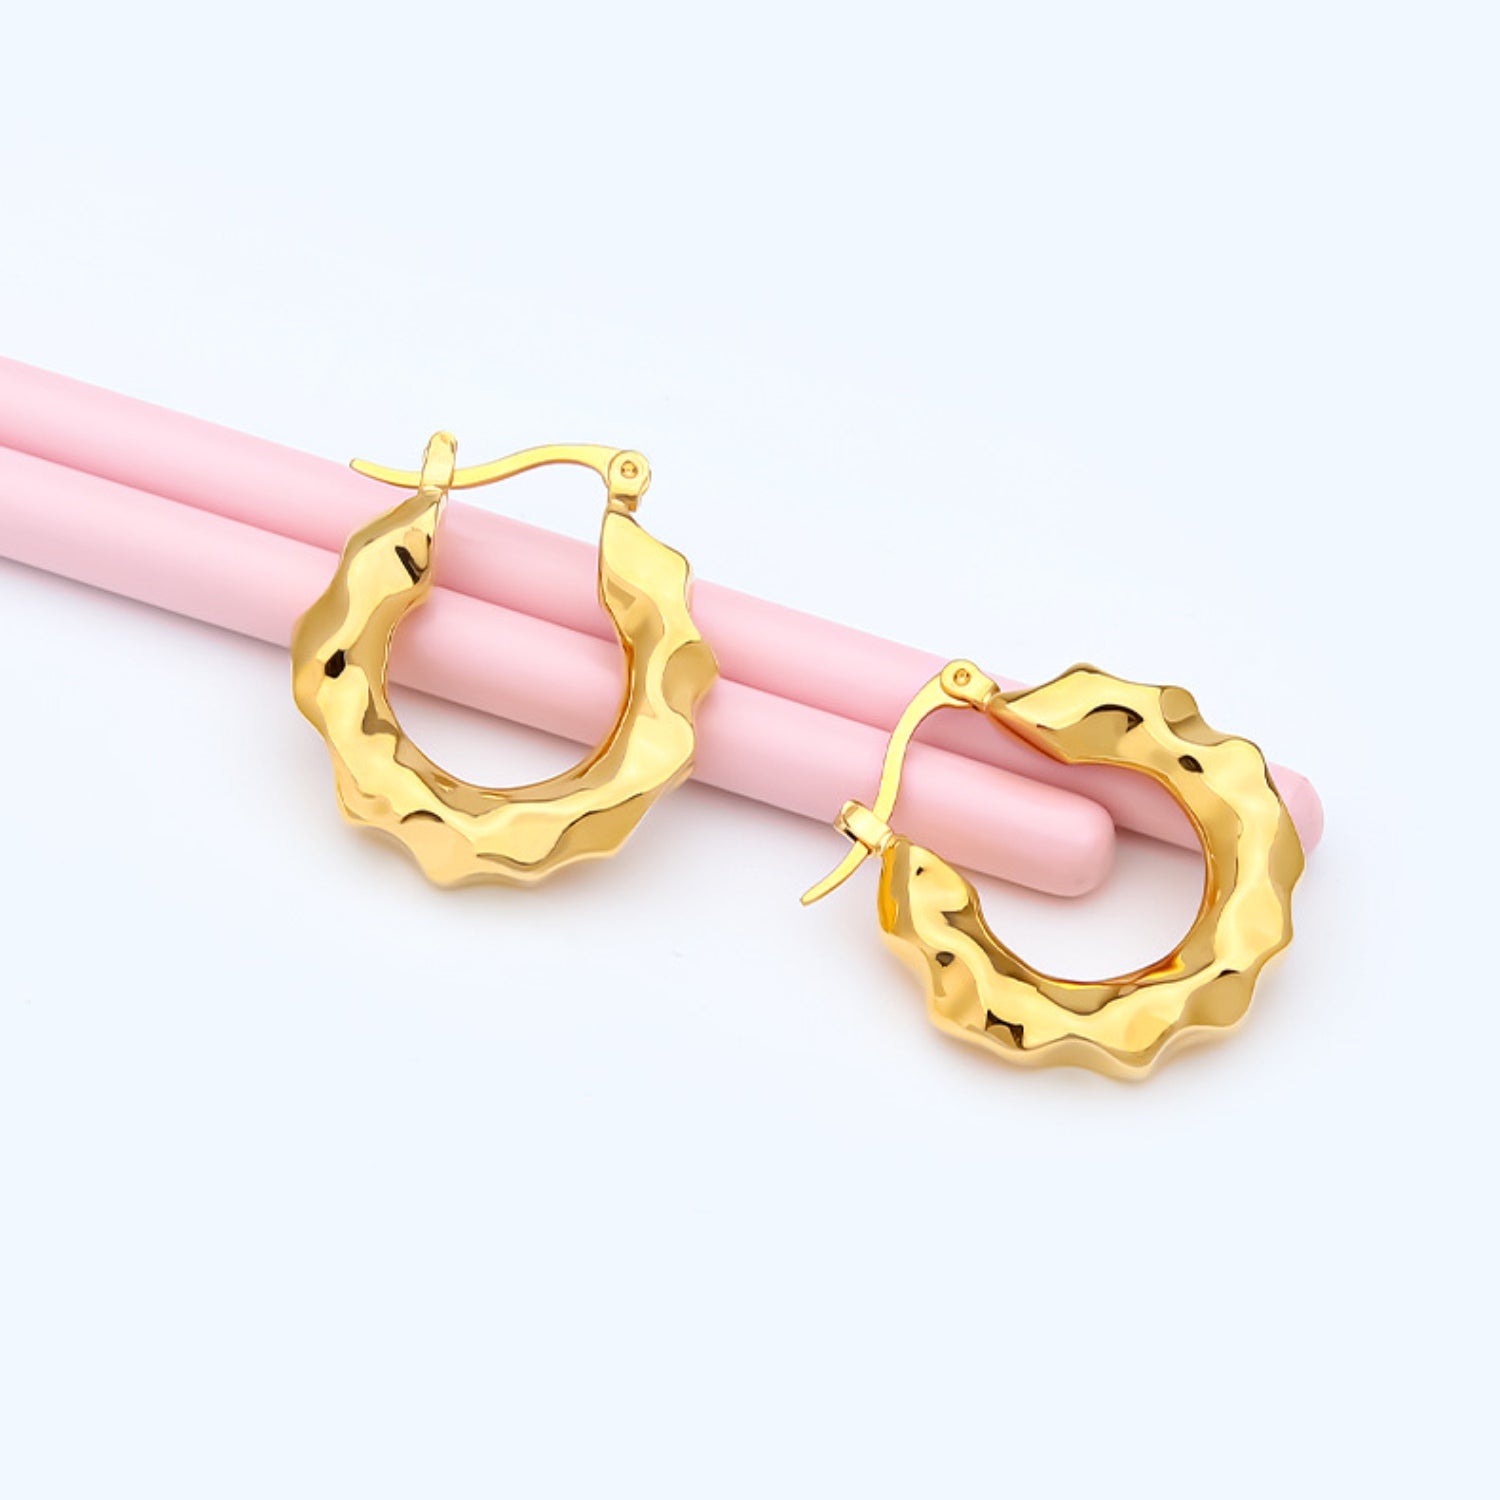 Chic Gold-Plated Huggie Earrings